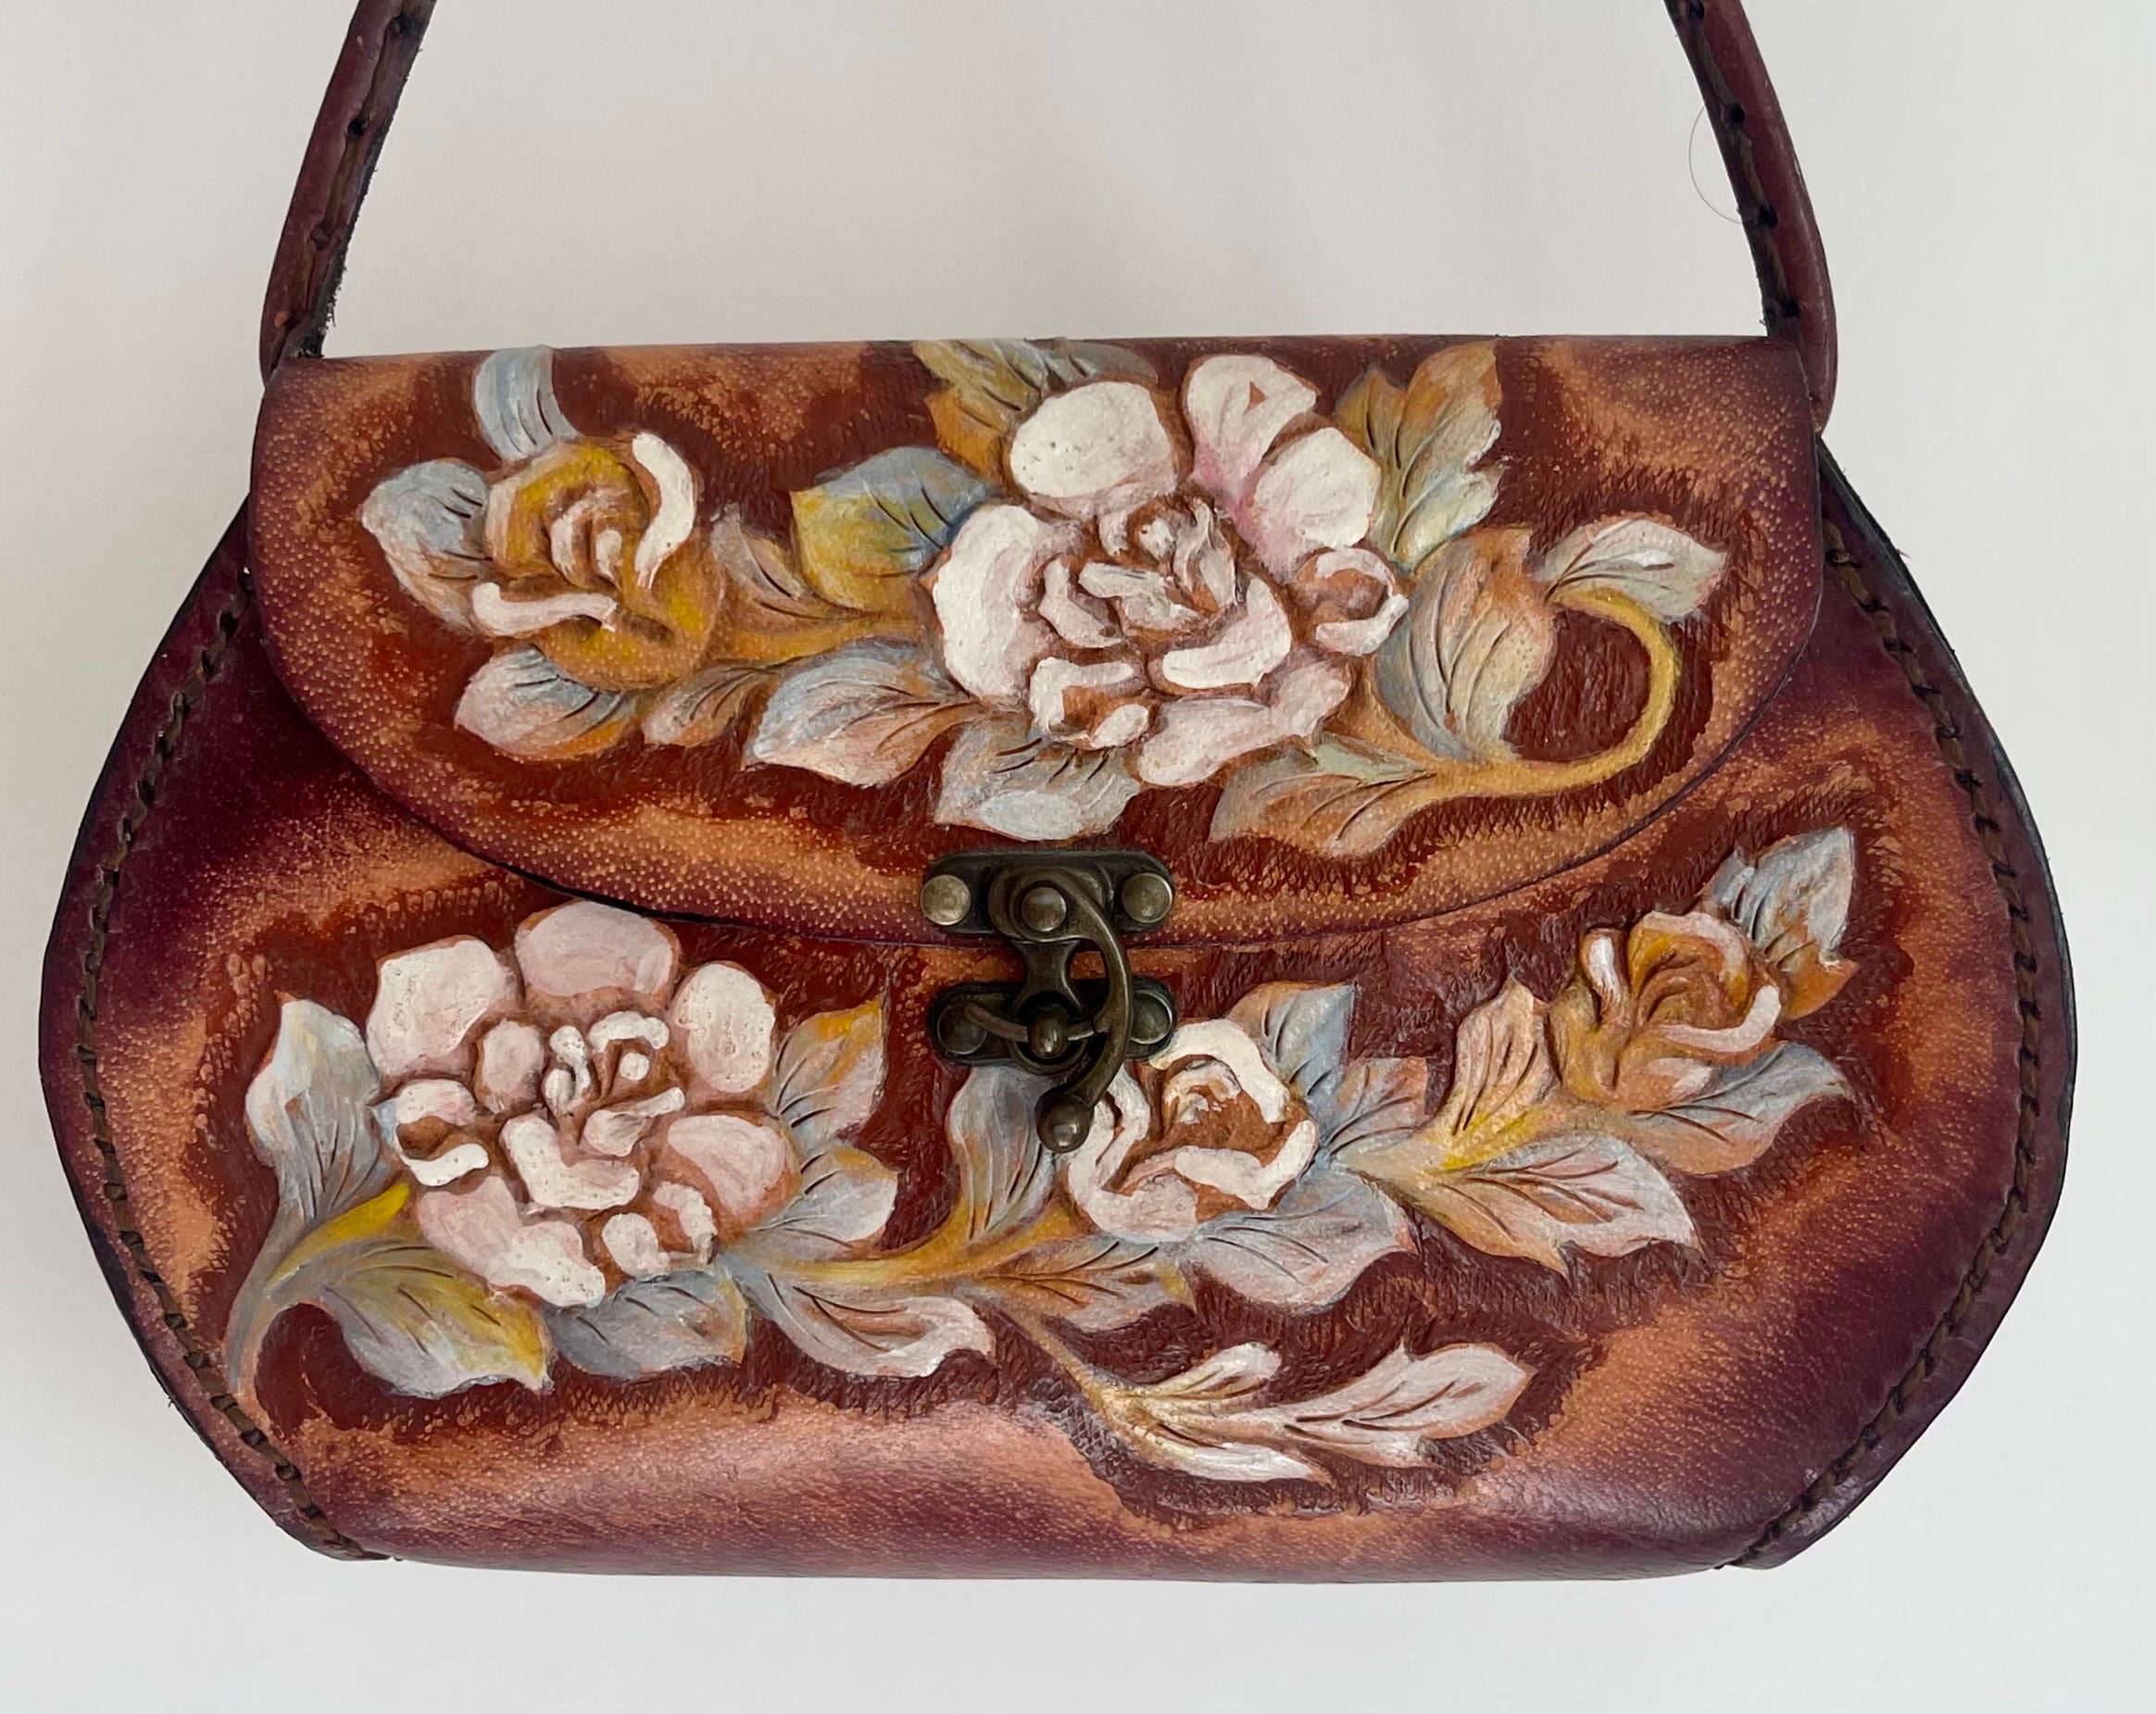 This Designer Makes Purses and Other Accessories Into Art With Hand-Painted  Details